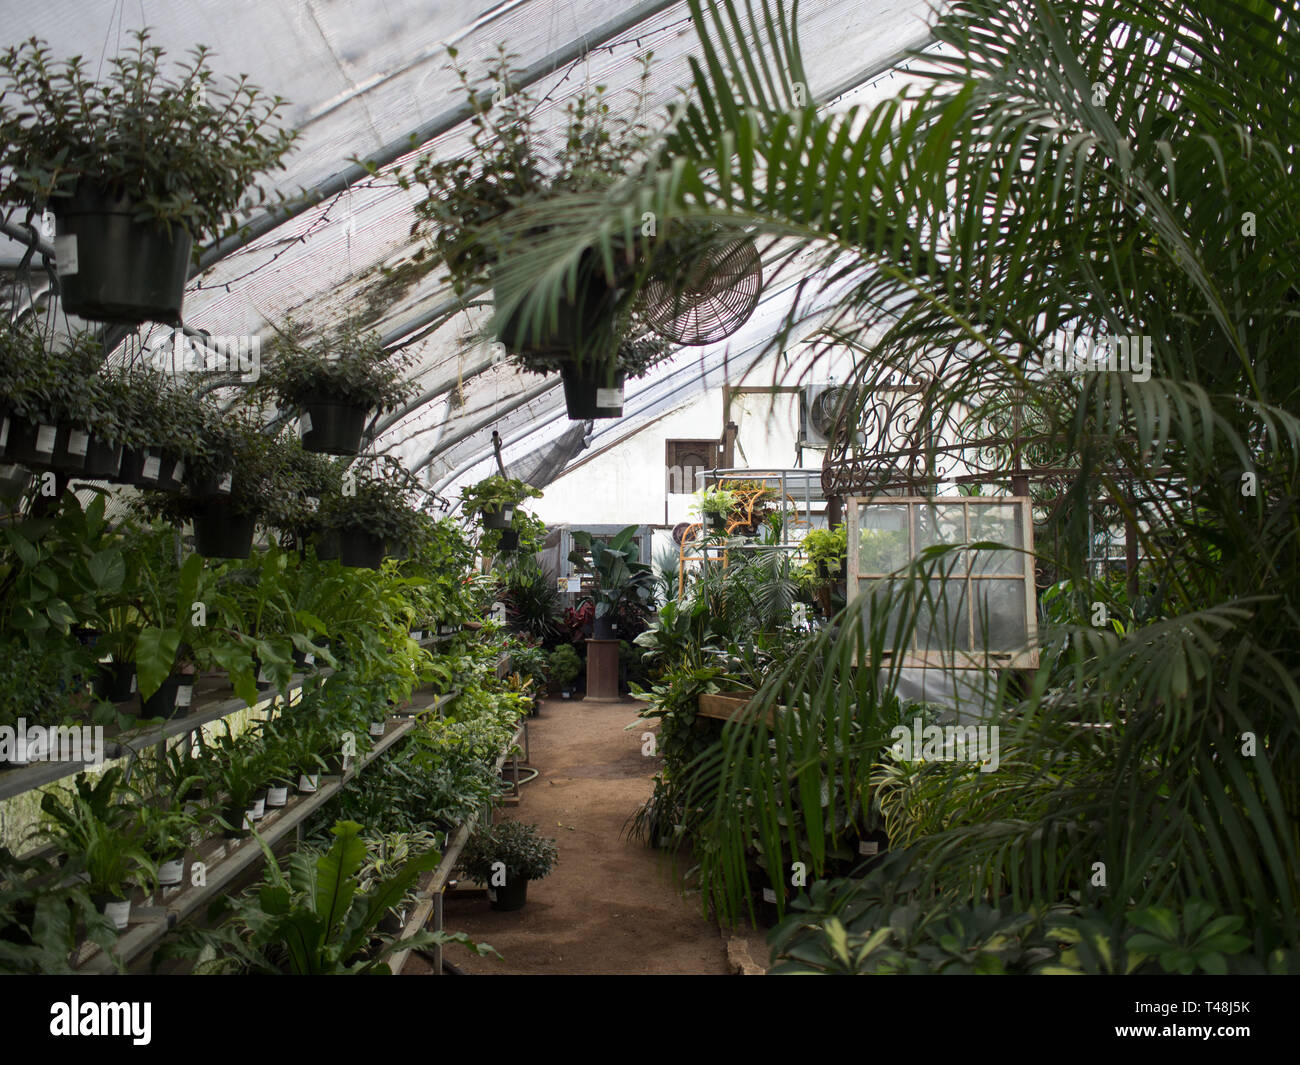 Tropical greenhouse at The Great Outdoors nursery in Austin, Texas Stock Photo